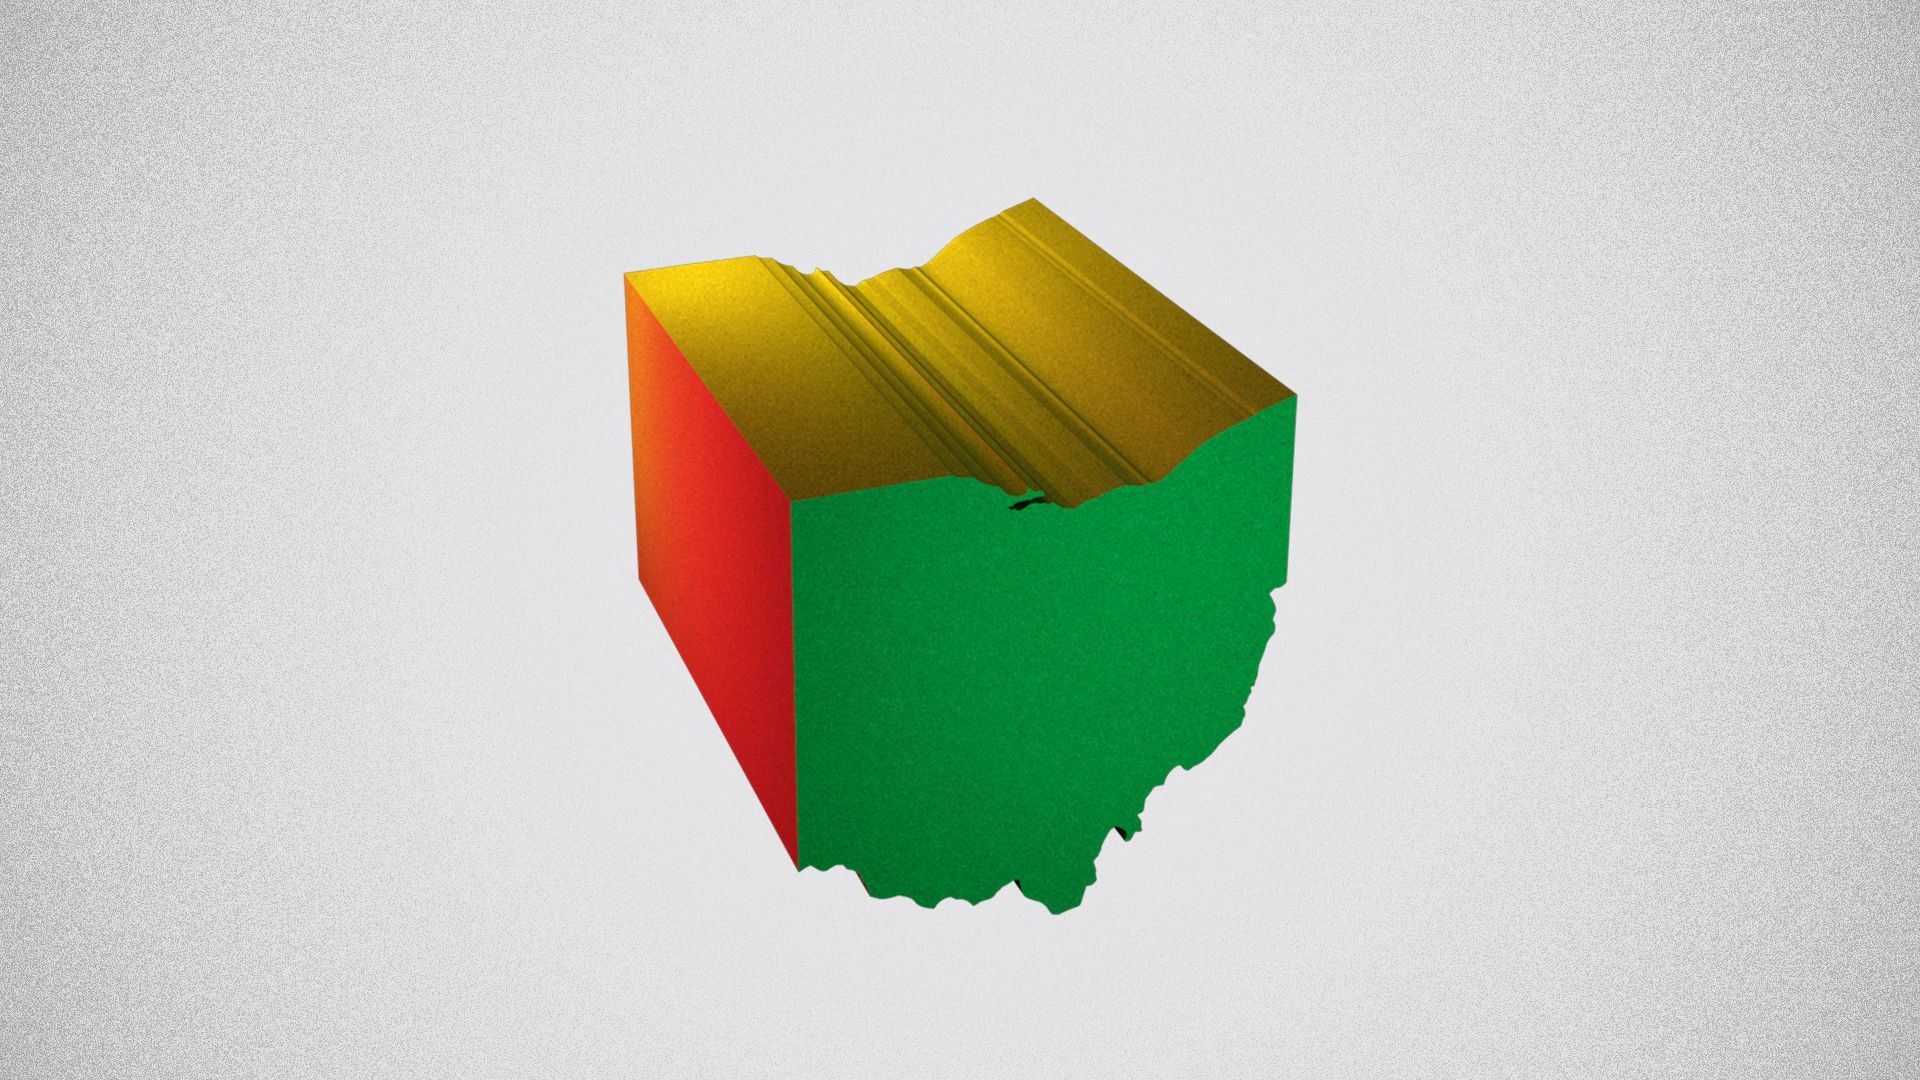 Illustration of the state of Ohio lit by red, green and yellow lights.